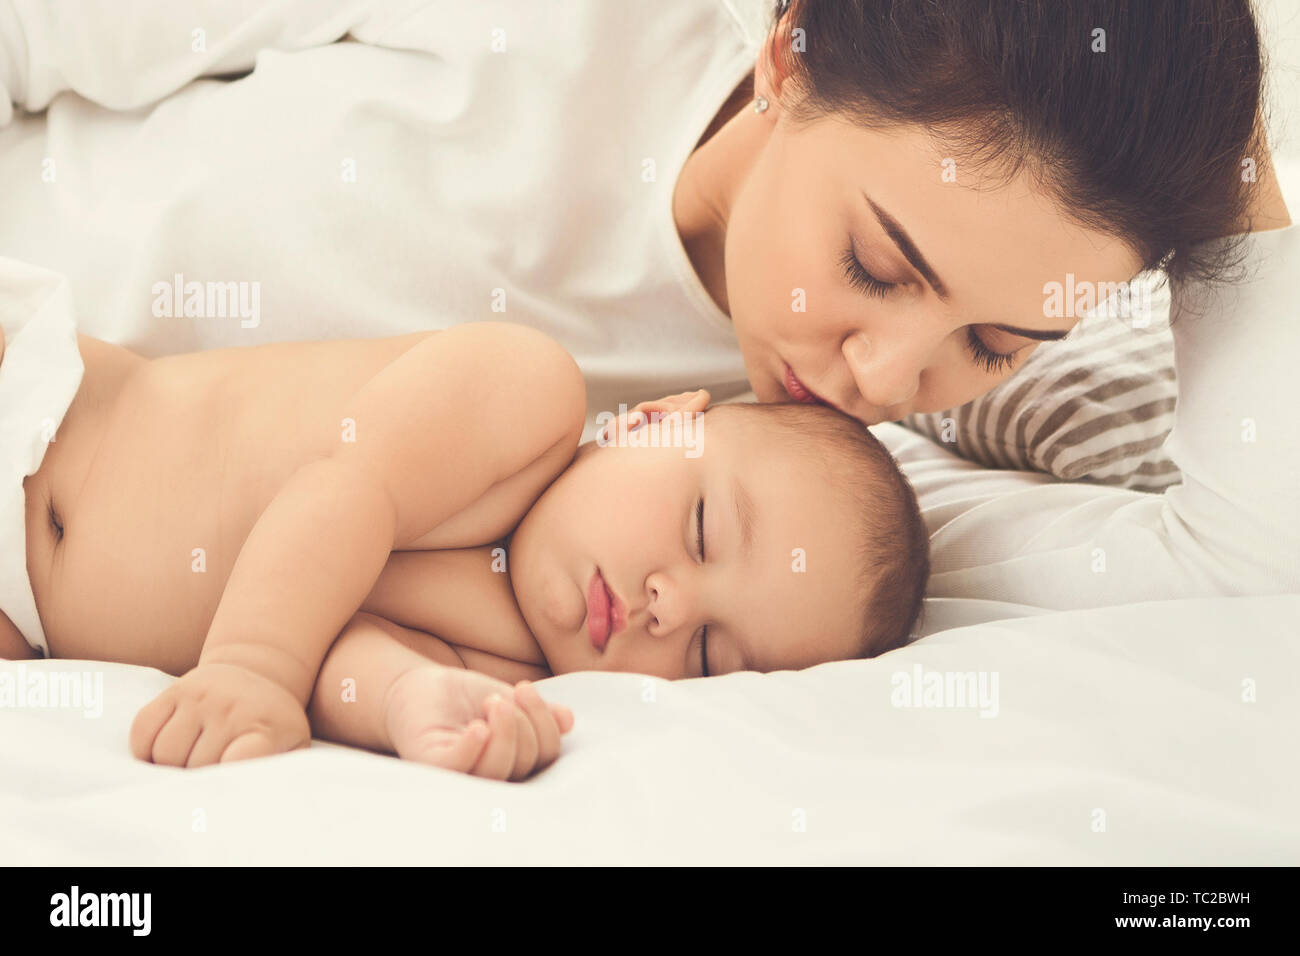 Mother kissing her sleeping newborn baby in bed Banque D'Images